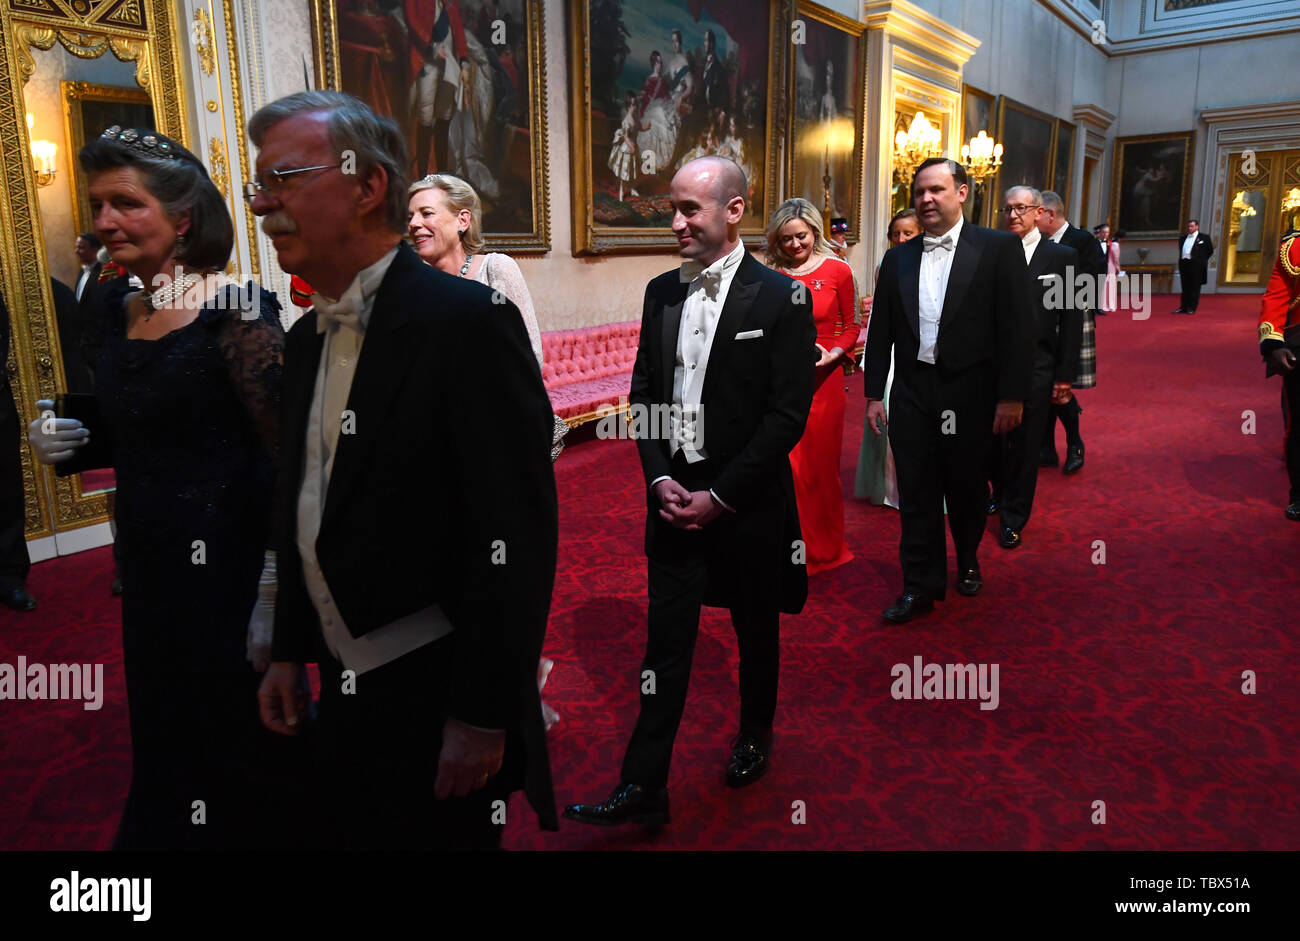 The Countess Peel and Stephen Miller arrive through the East Gallery during the State Banquet at Buckingham Palace, London, on day one of the US President's three day state visit to the UK. Stock Photo